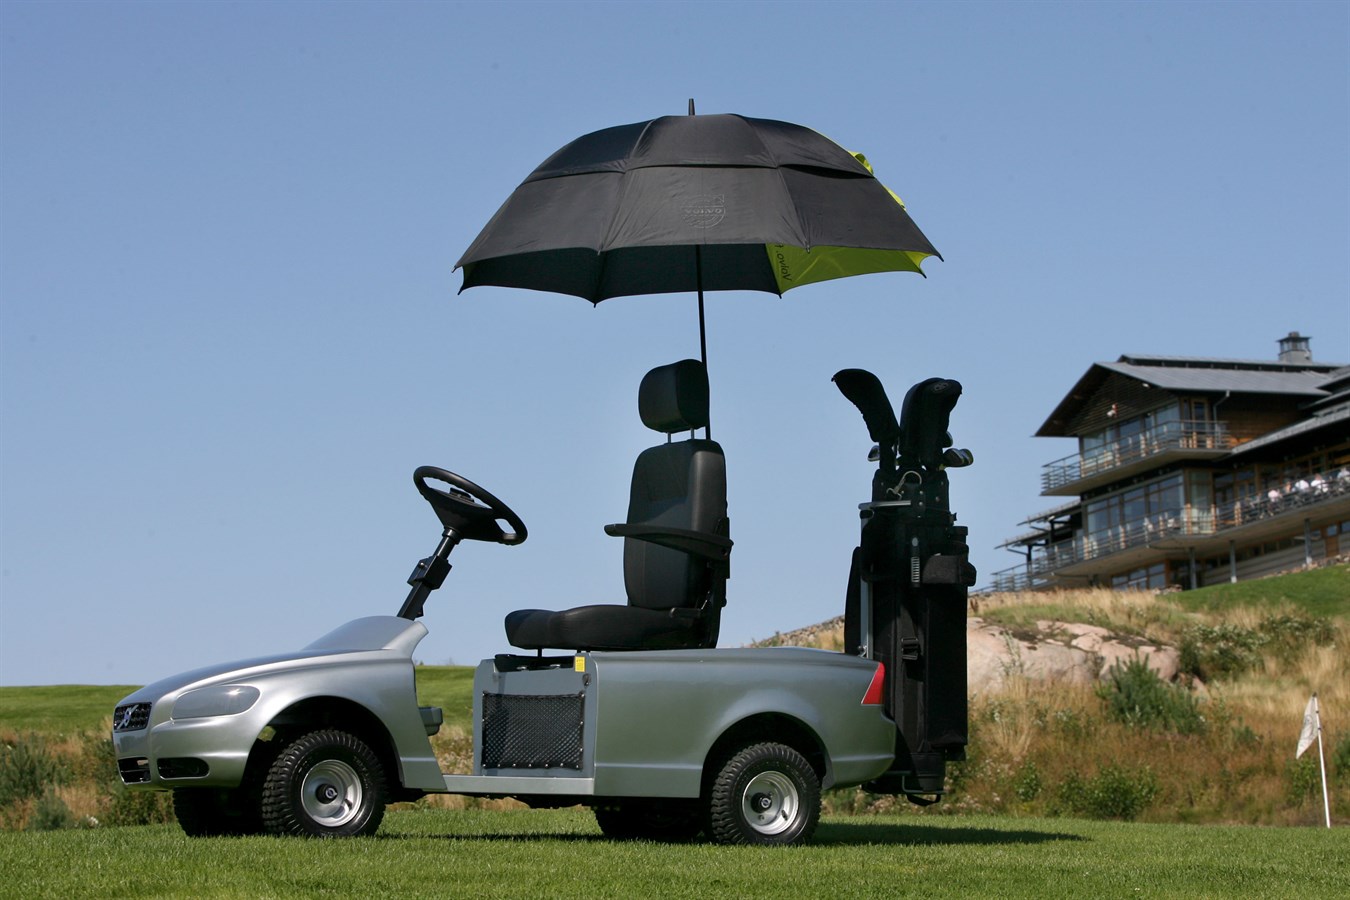 The Volvo for golfers everywhere